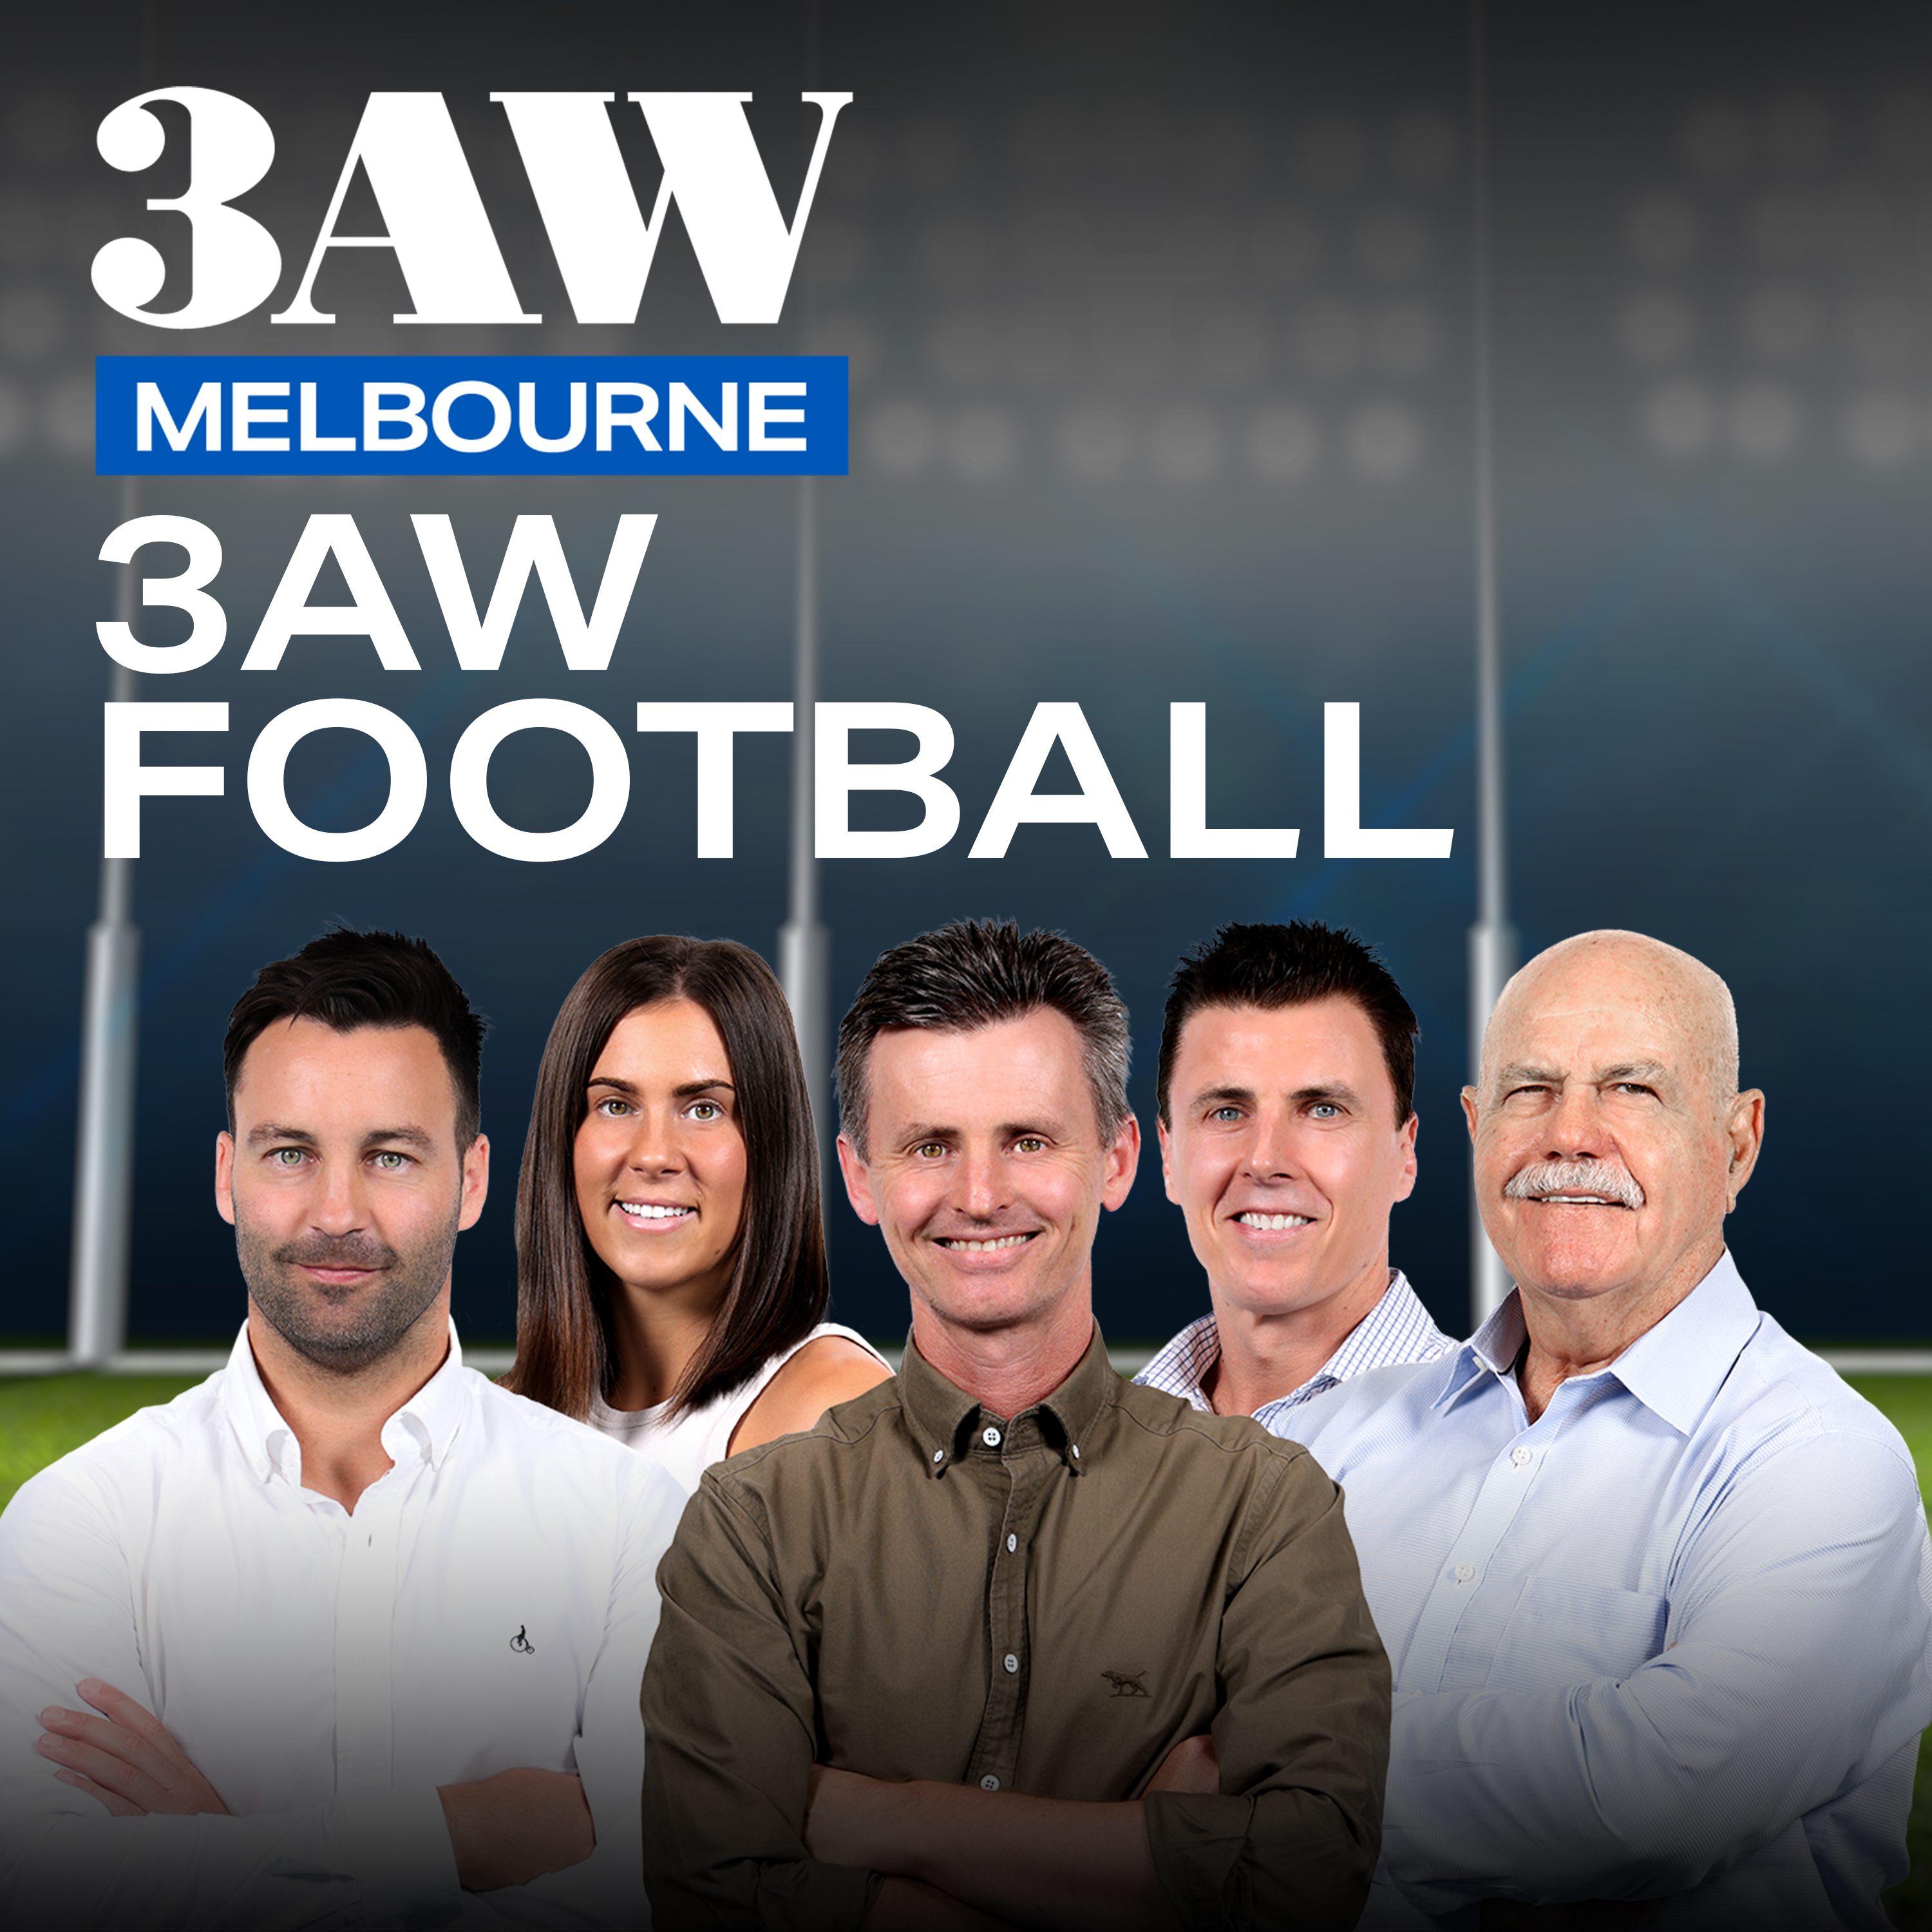 Tom Harley tells 3AW why Sydney has the most supporters in the AFL